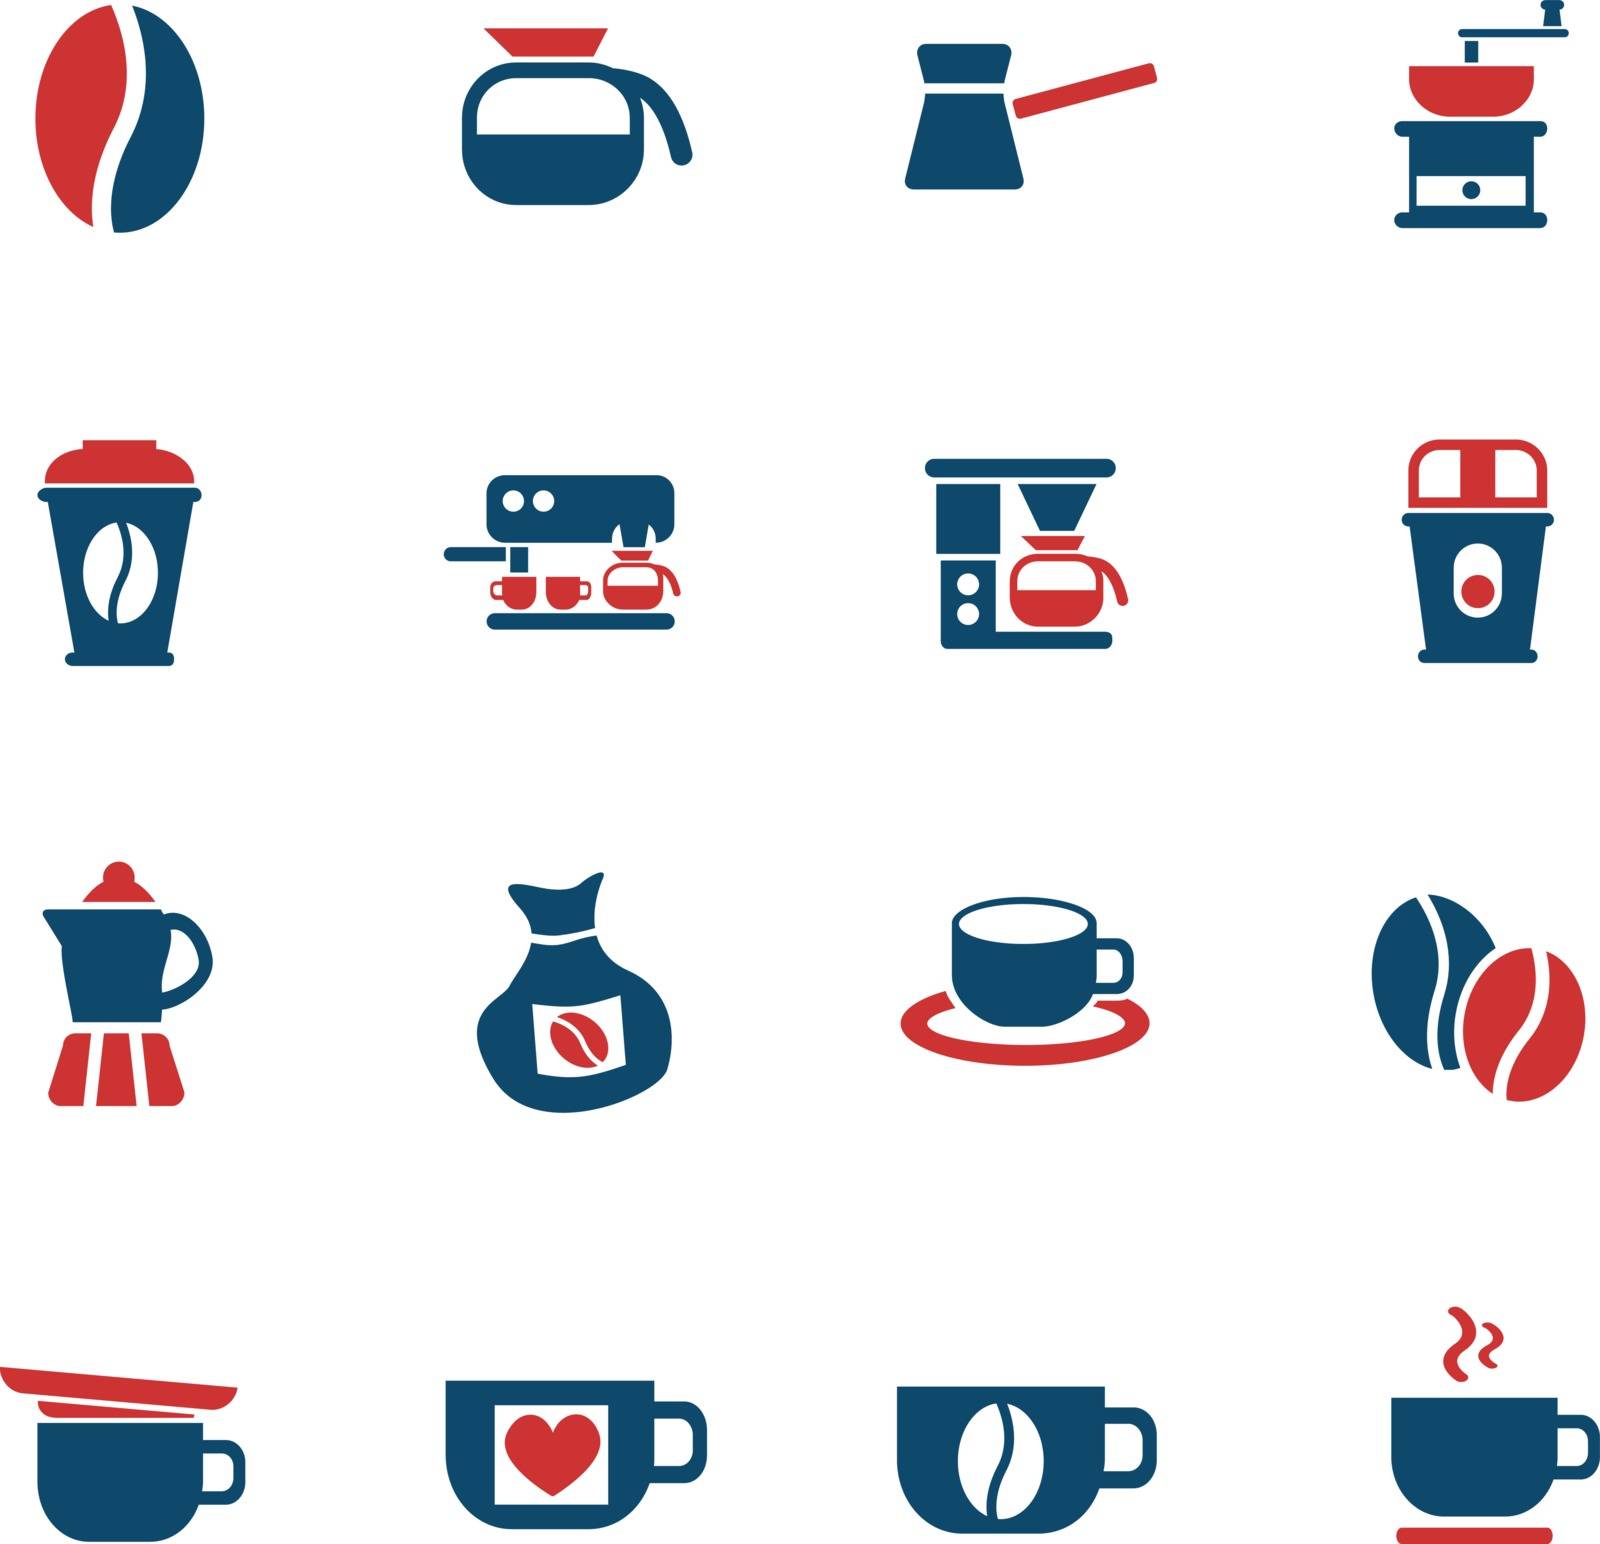 coffee web icons for user interface design